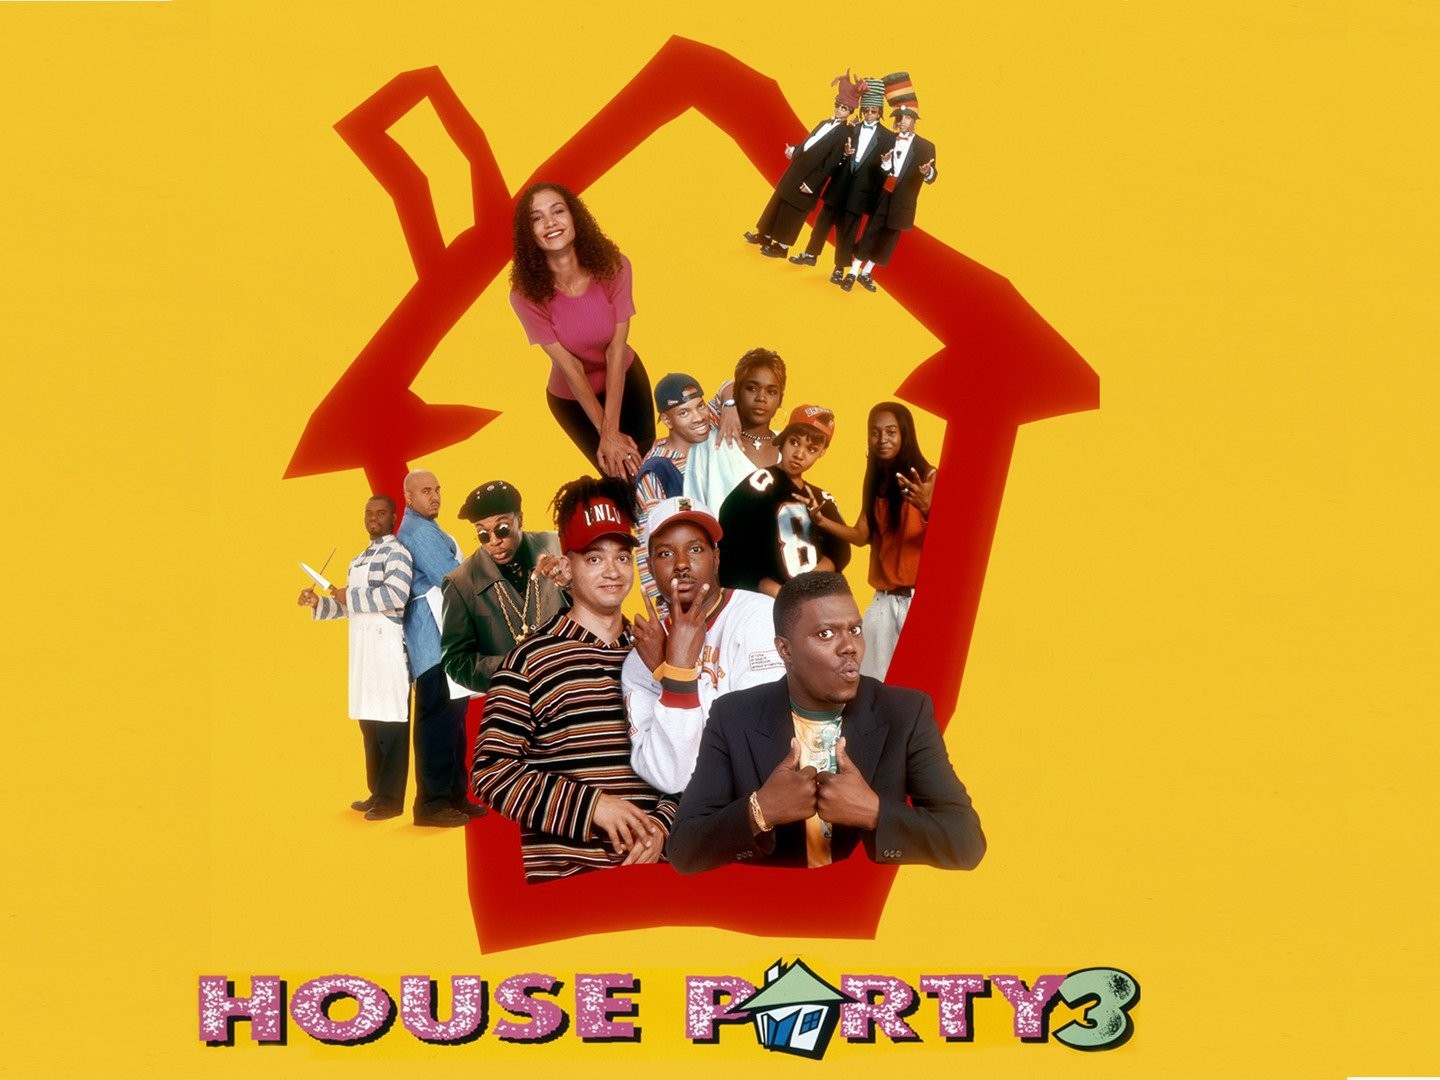 Best of House party 3 full movie